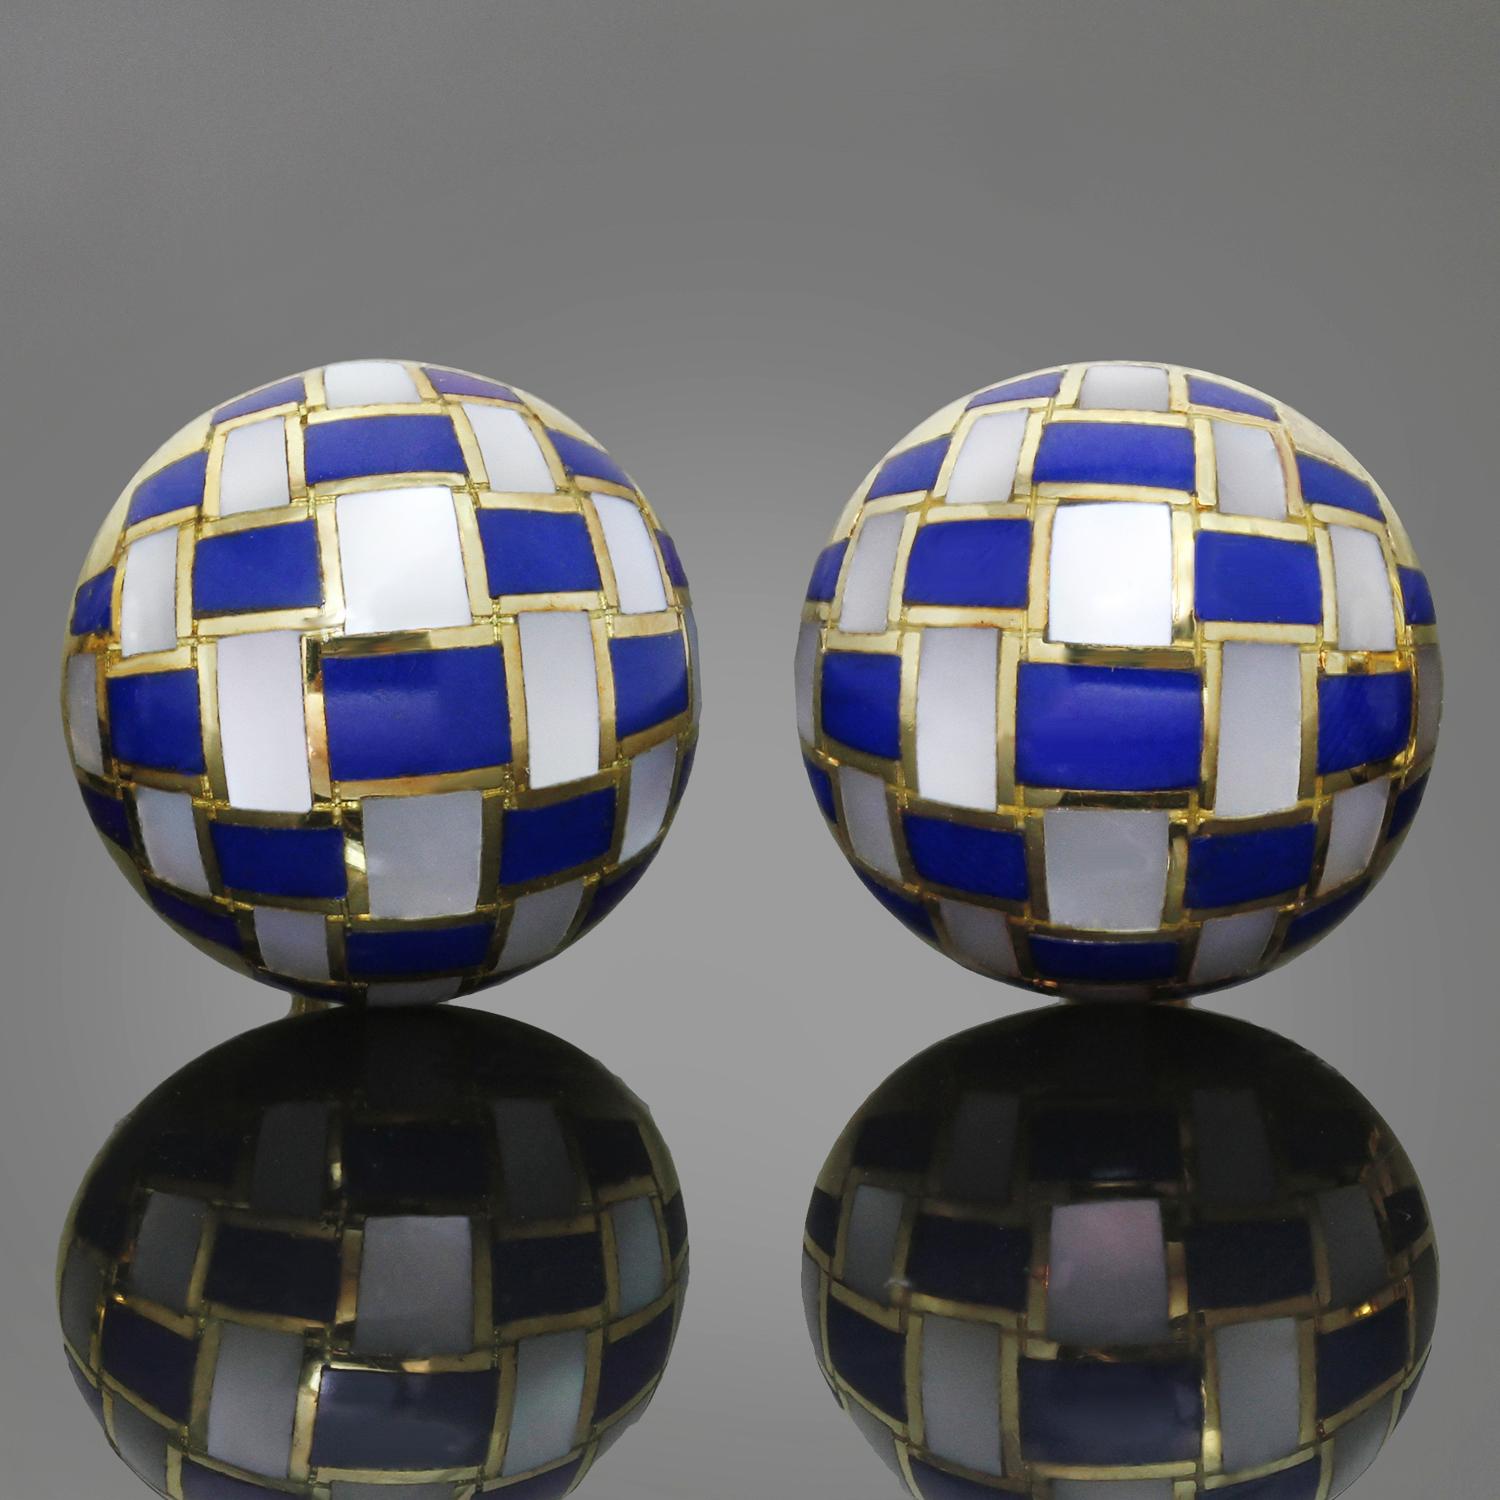 These fabulous Tiffany & Co. earrings are designed by Anglela Cummings and feature a checkered white & blue pattern crafted in 18k yellow gold and inlayed with lapis lazuli and mother-of-pearl. Made in United States circa 1980s. Measurements: 0.78